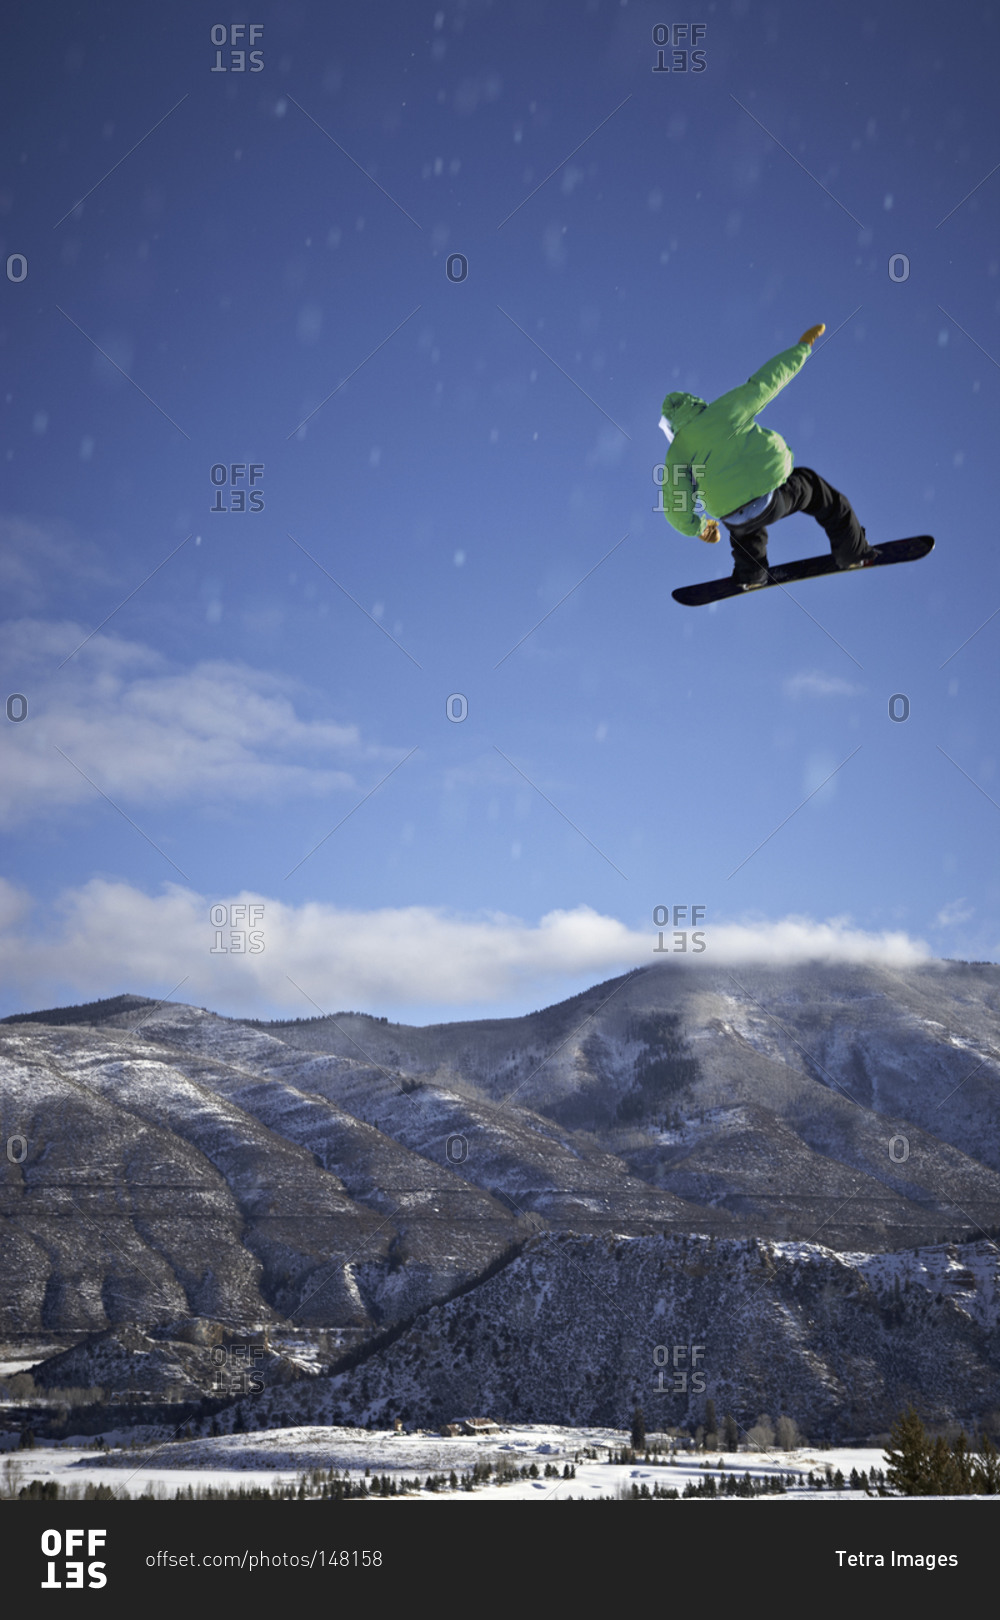 Snowboarder in mid-air